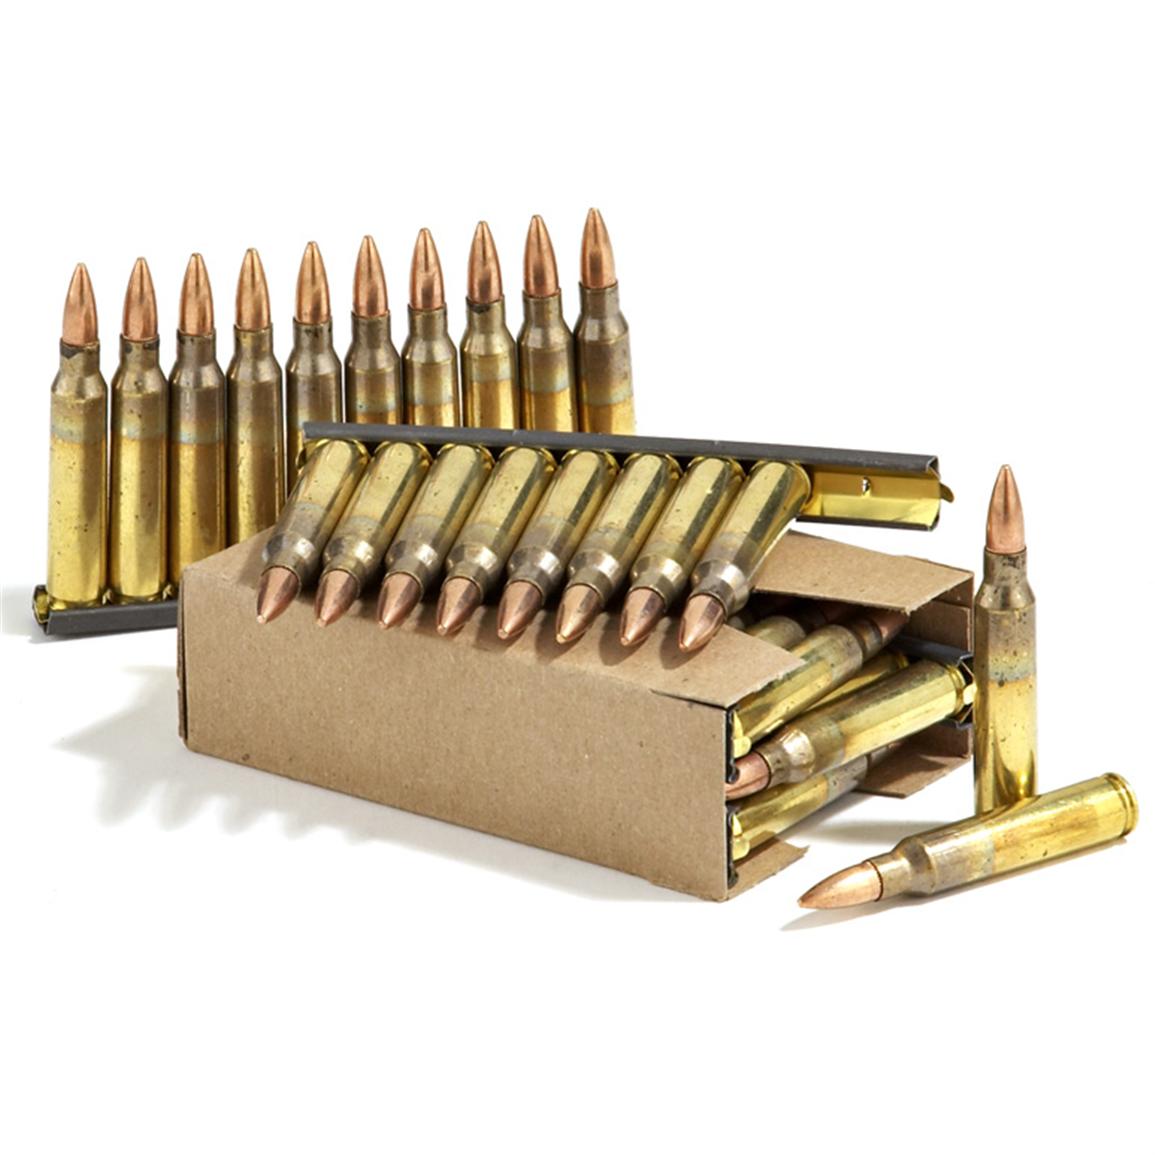 900 Rounds Federal 223 5 56x45mm 55 Grain FMJ Ammo 136360 223 